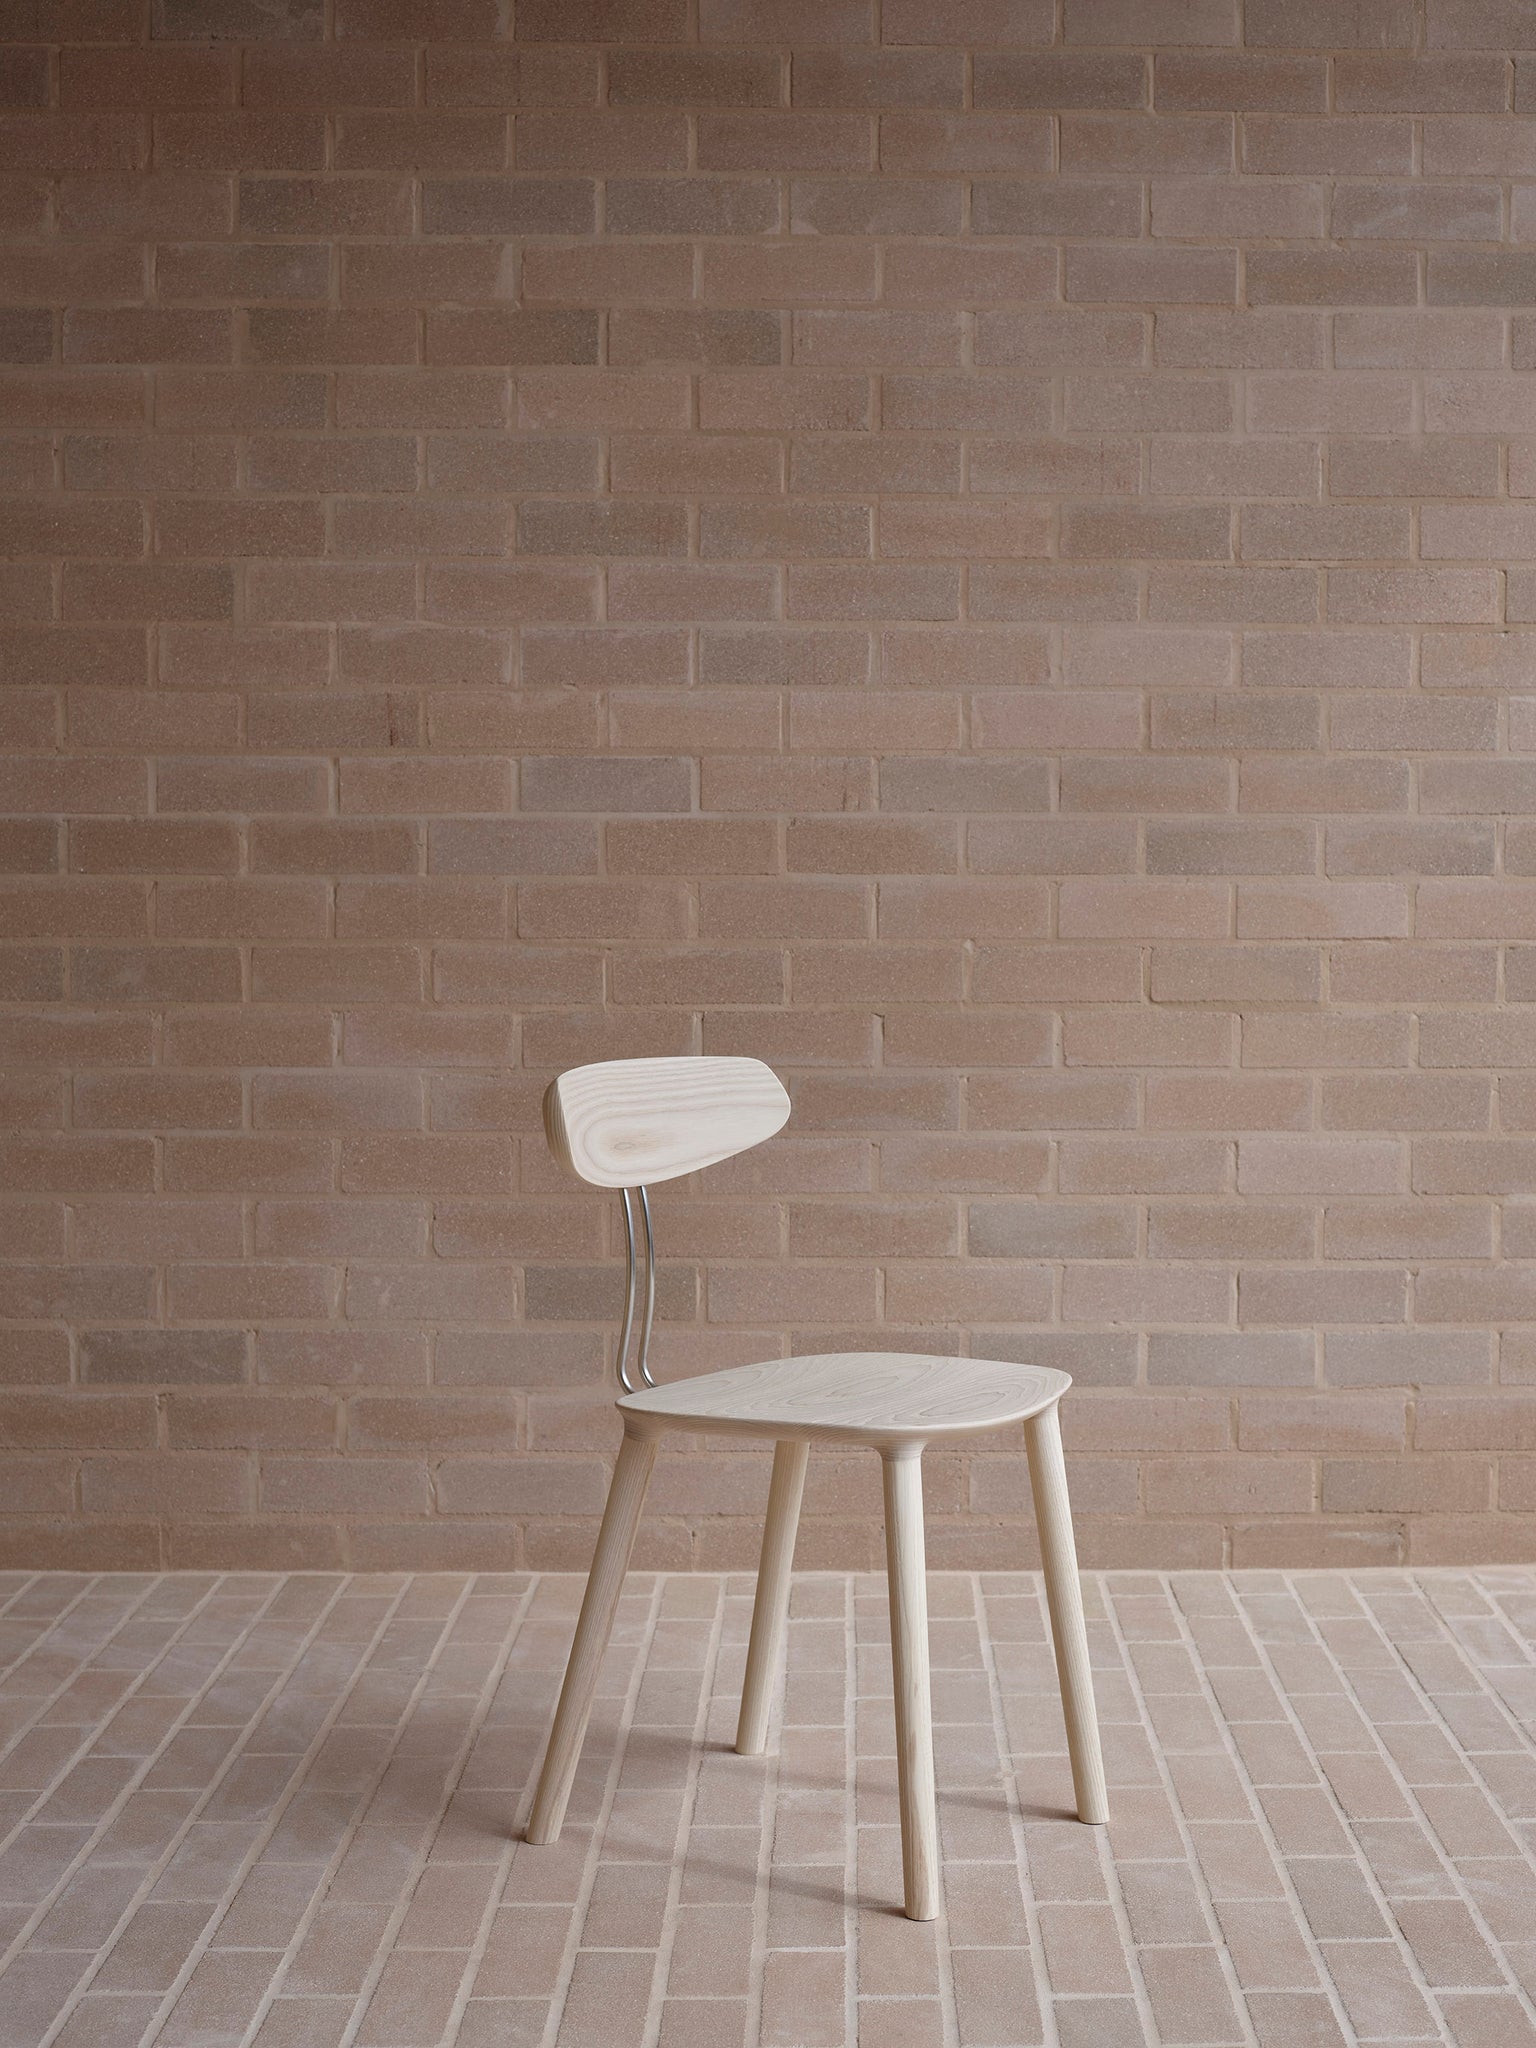 Mast Furniture Stem chair in White ash on an angle